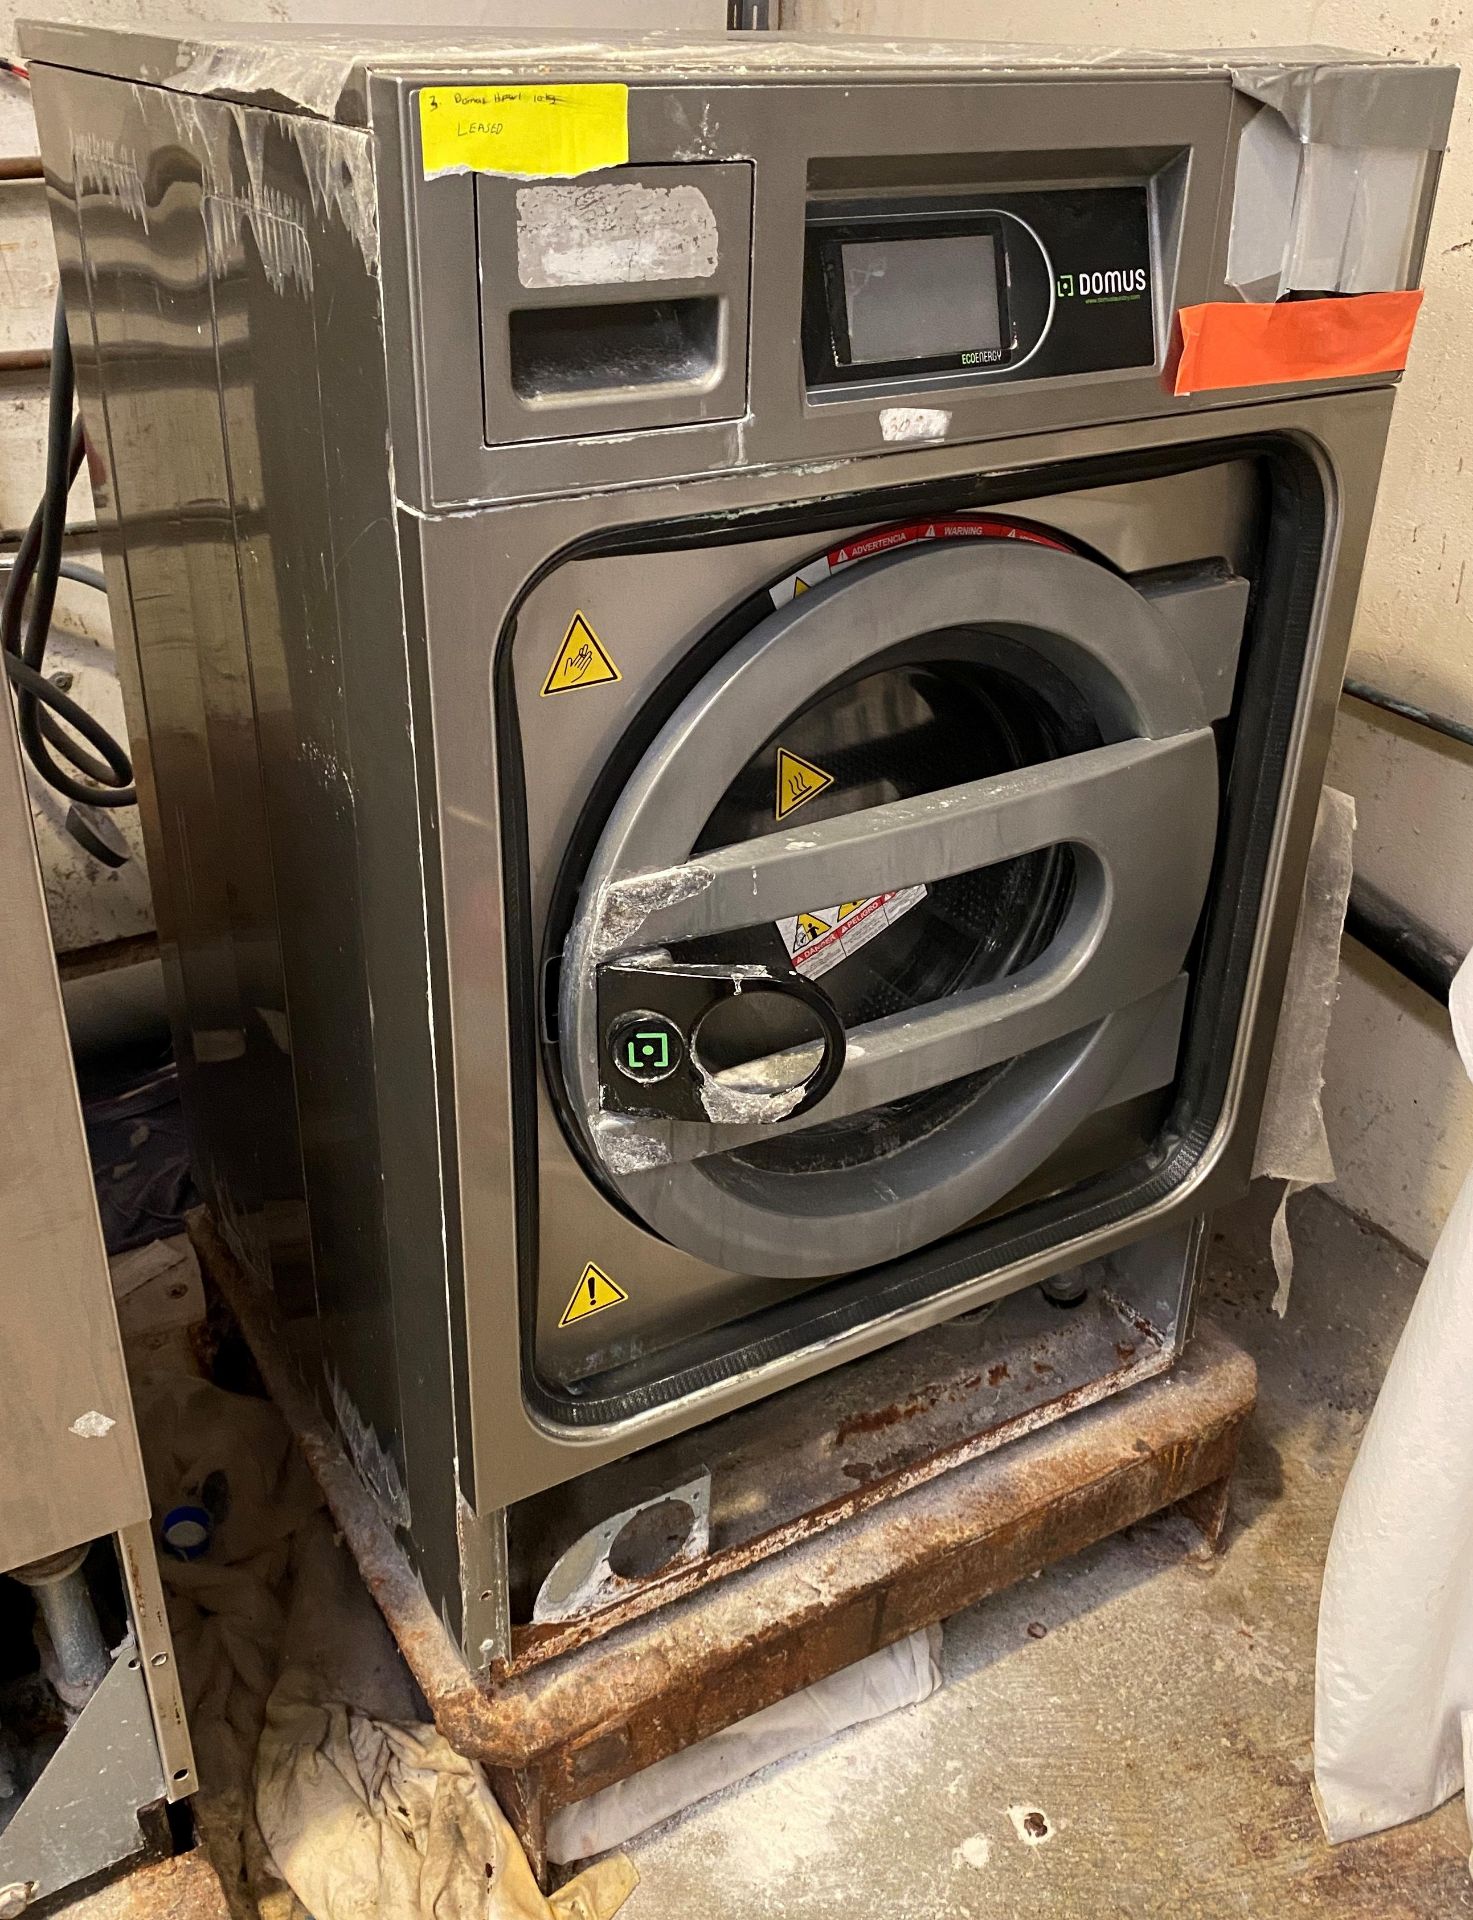 Domus HPW-10 Touch EV Commercial Washing Machine and Plinth. DOM 10/2018 ref. 19053154 sn. - Image 2 of 5